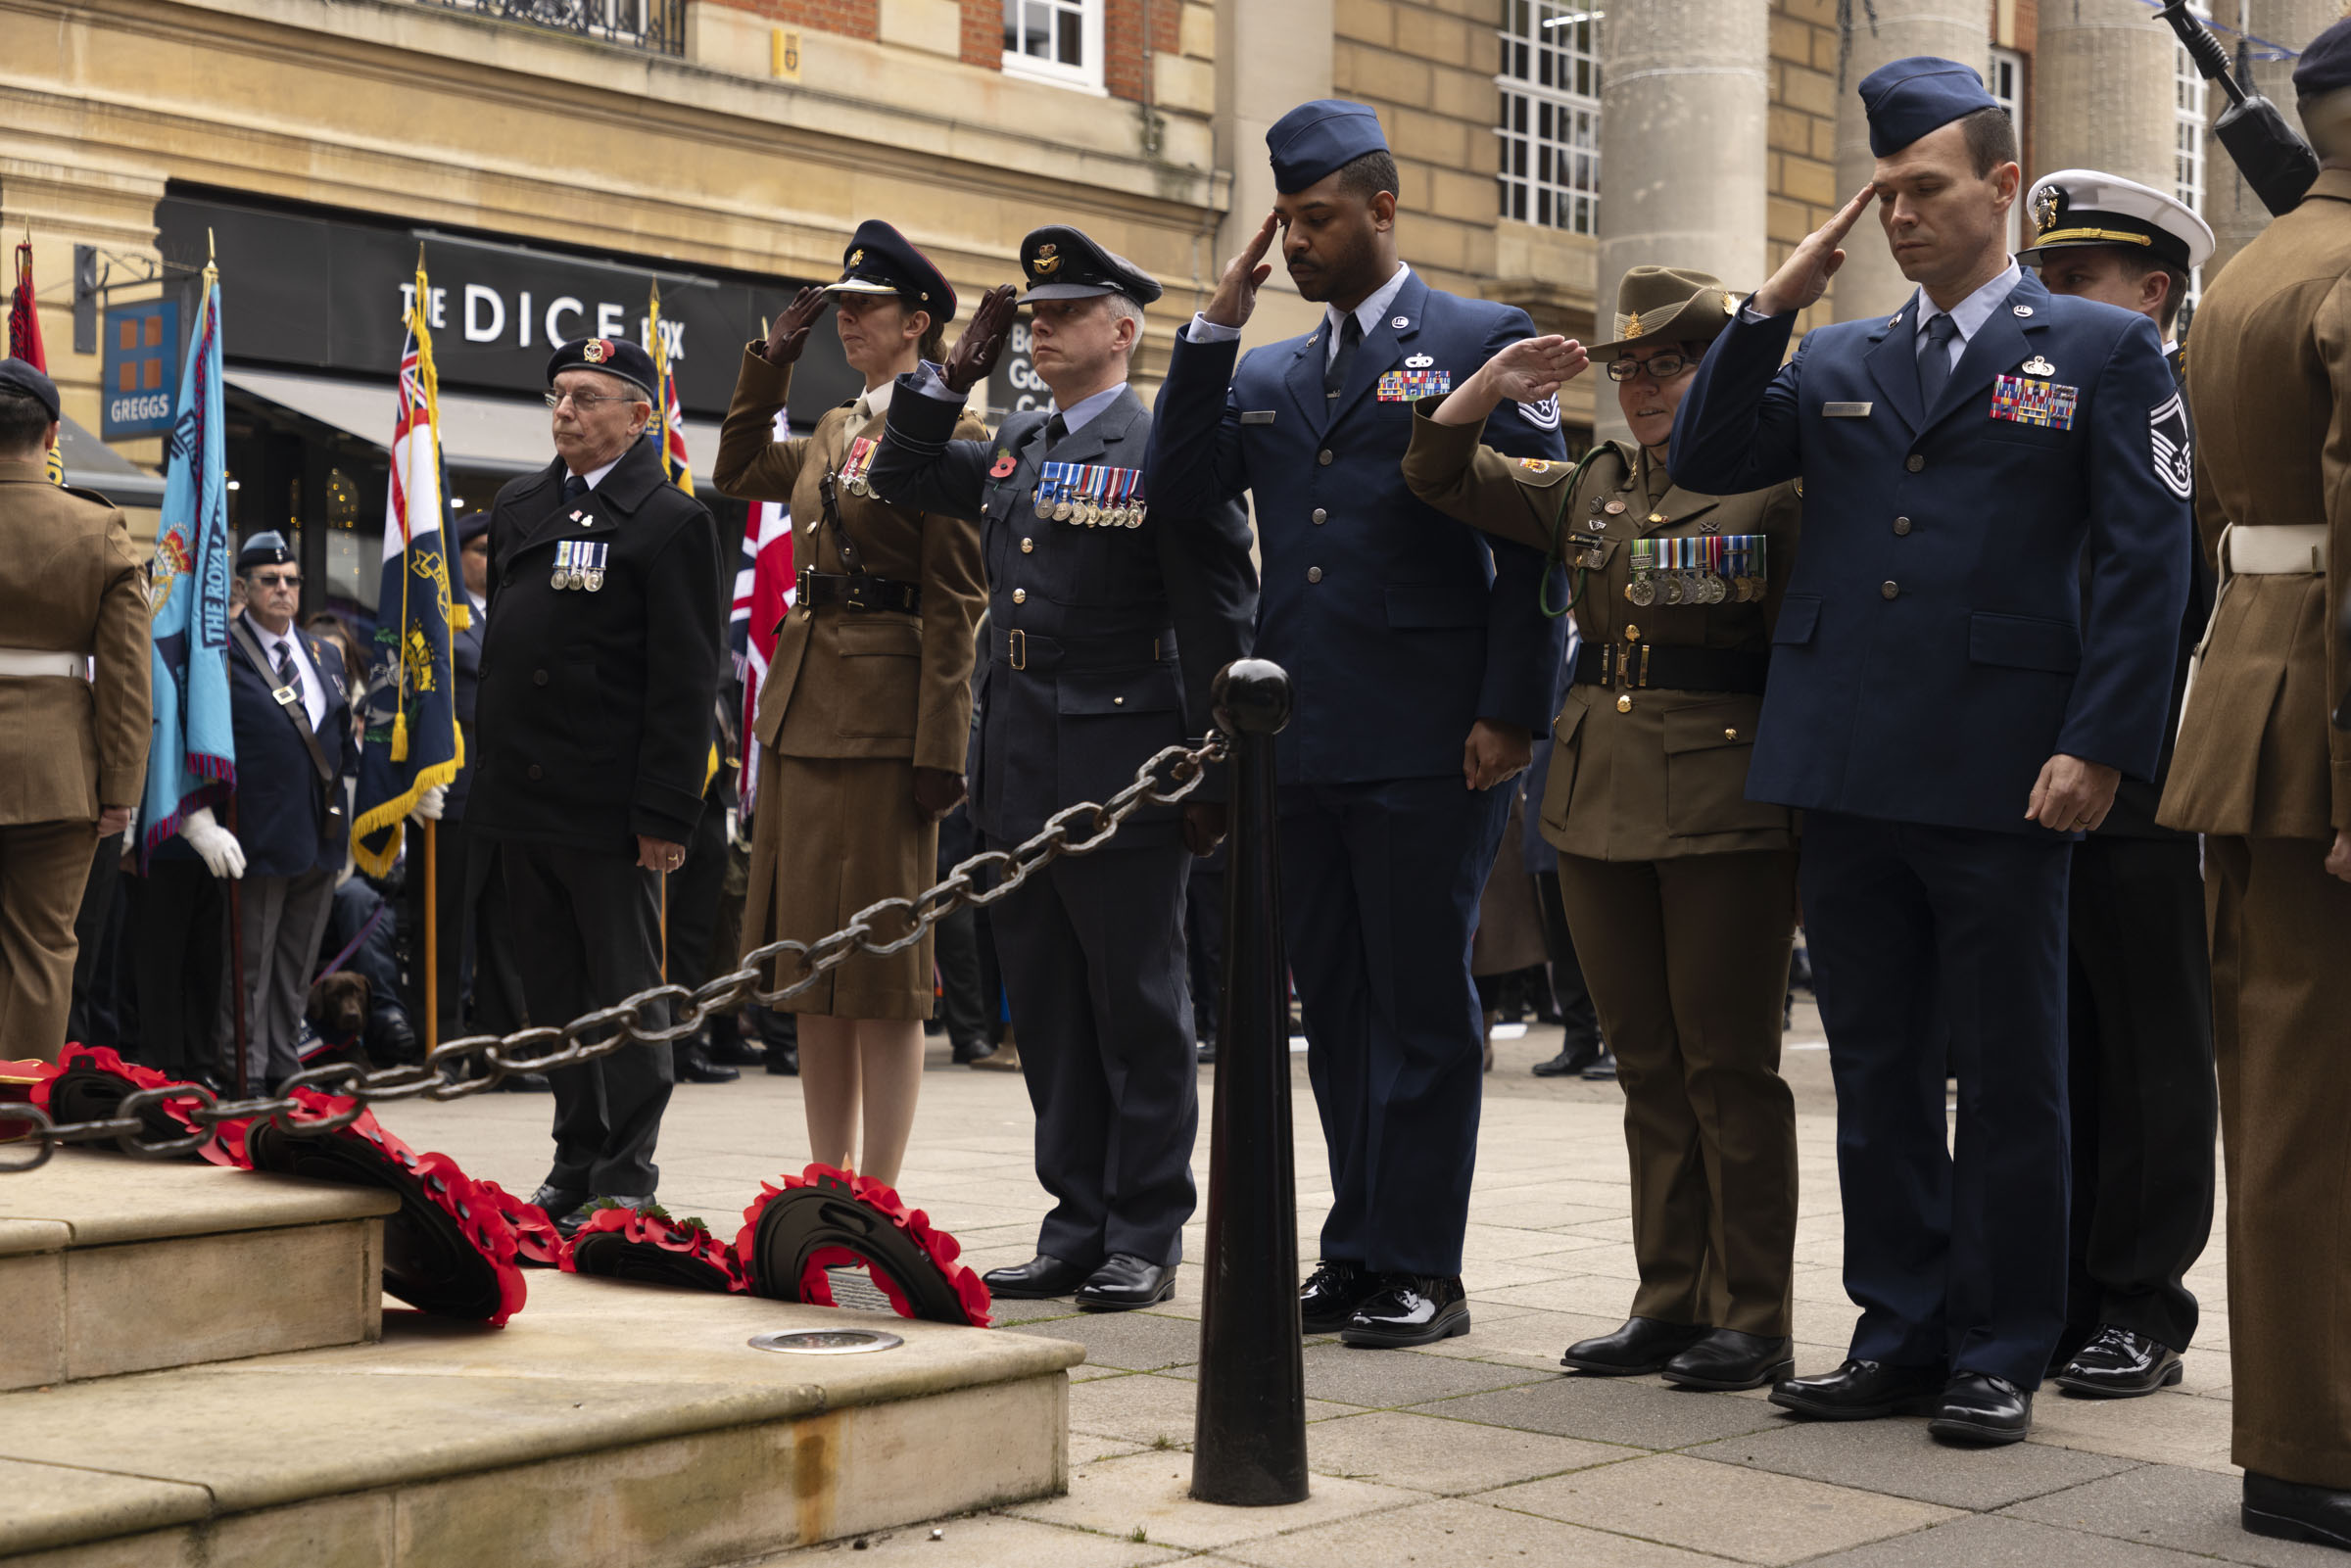 Flt Lt Dean McAulay represents the Royal Air Force at Peterborough’s Remembrance Service